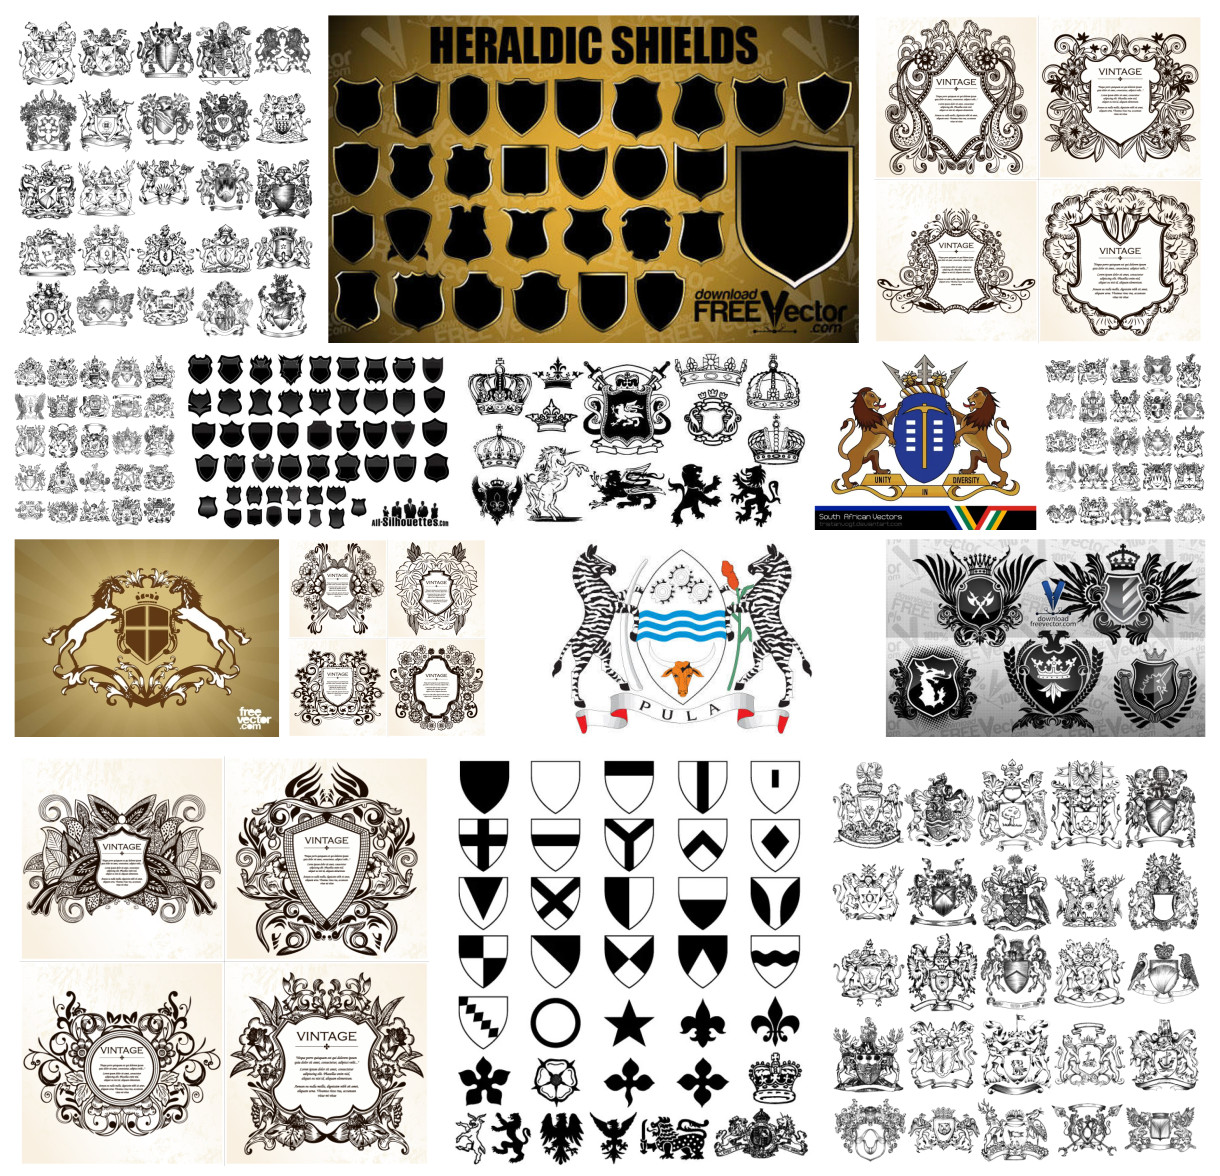 A Creative Collection of Diverse Coat of Arms Vector Designs